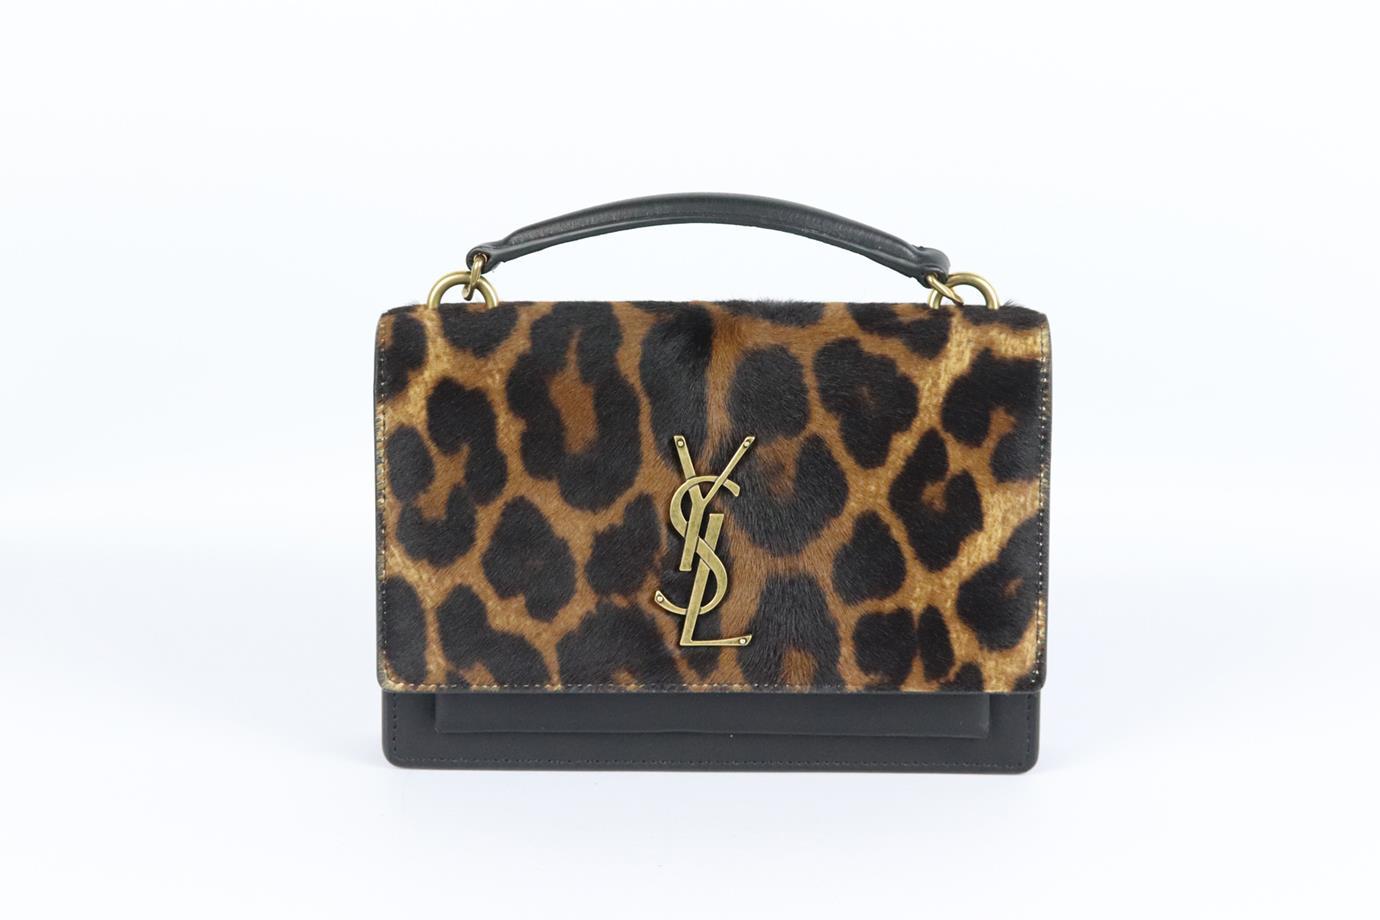 Saint Laurent Sunset mini printed calf hair and leather shoulder bag. Made from black and brown cheetah-print calf-hair and black leather with the brand’s signature 'YSL' plaque on the front in antiqued-gold. Black and brown calf-hair, black